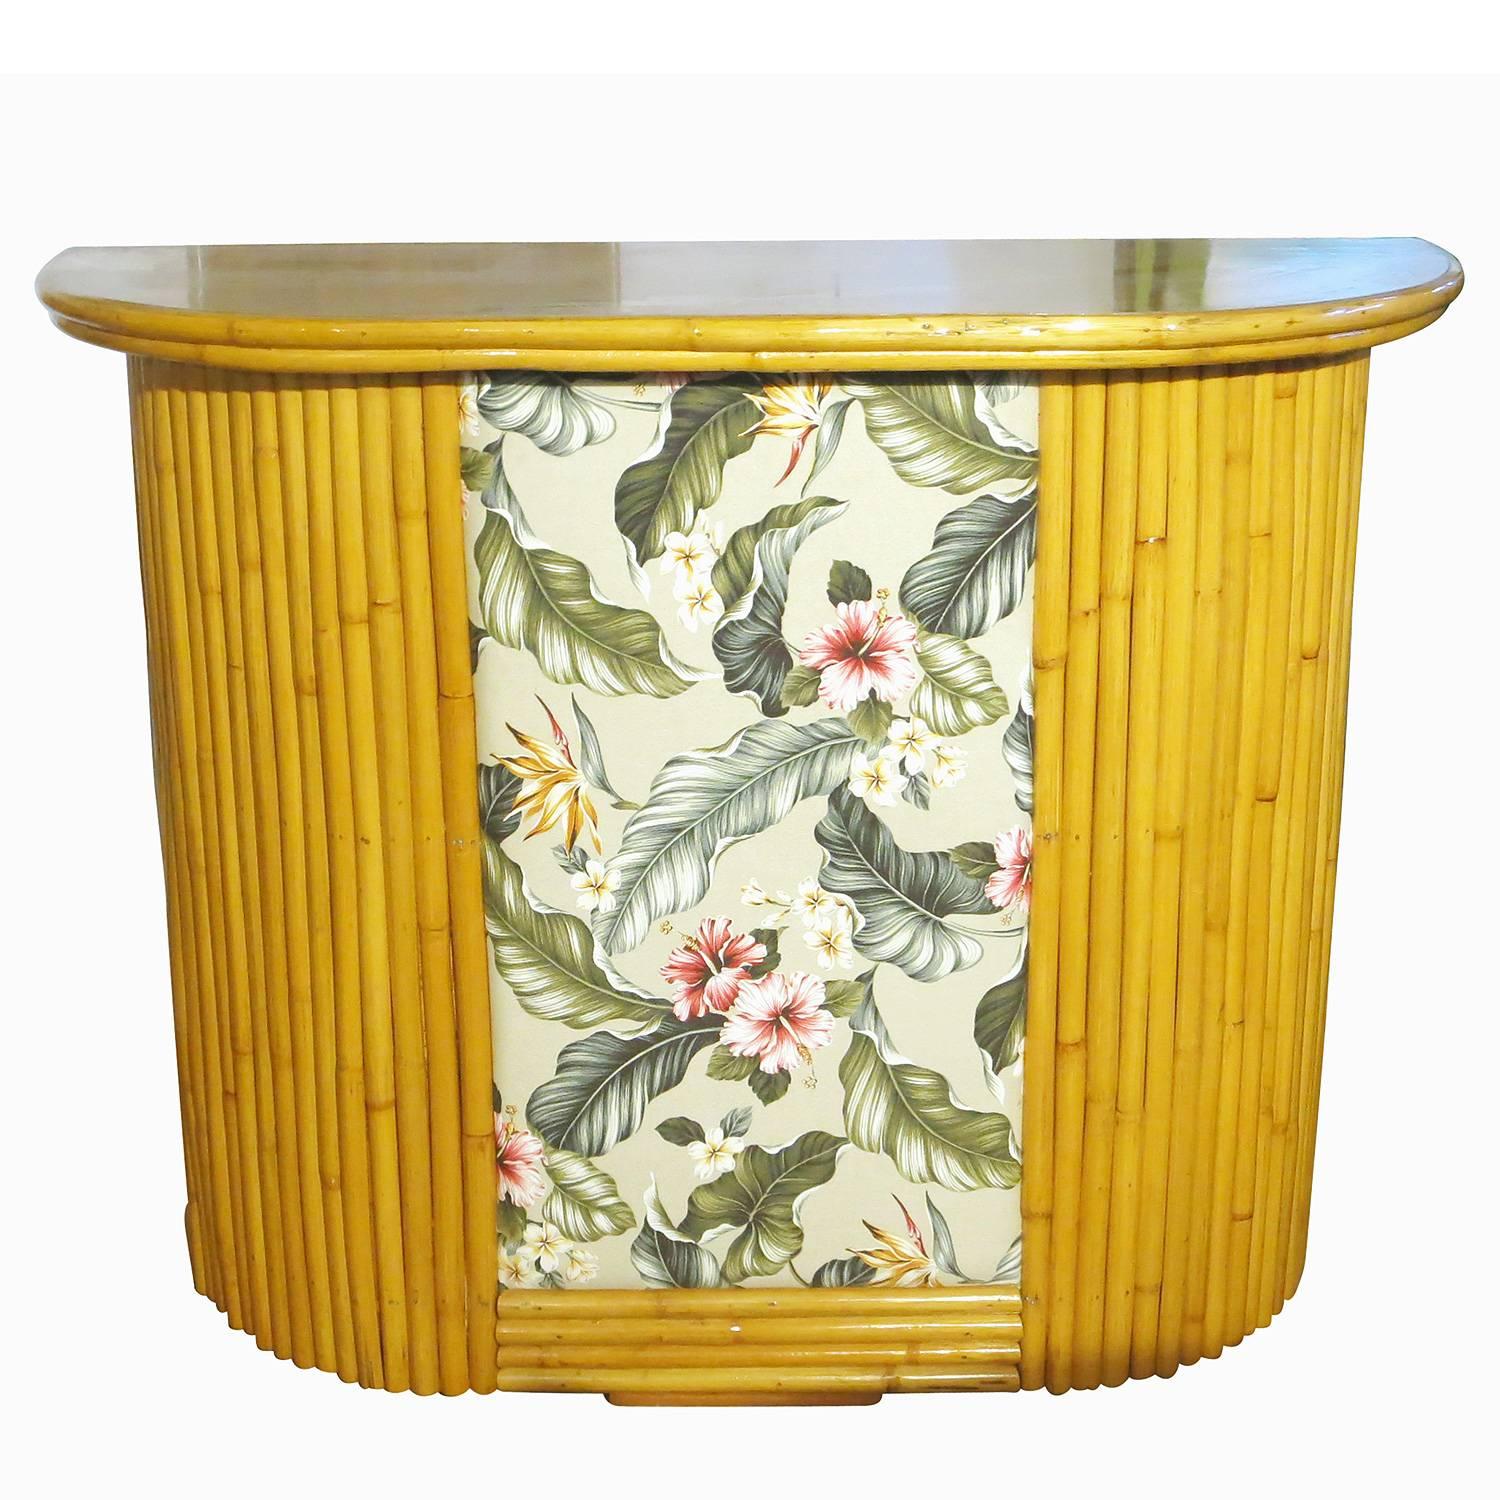 Pole rattan bar with formica top and bark cloth hibiscus print front, circa 1950. The bar features two shelves along the back for easy storage of spirits and glasses.


Restored to new for you.

All rattan, bamboo and wicker furniture has been